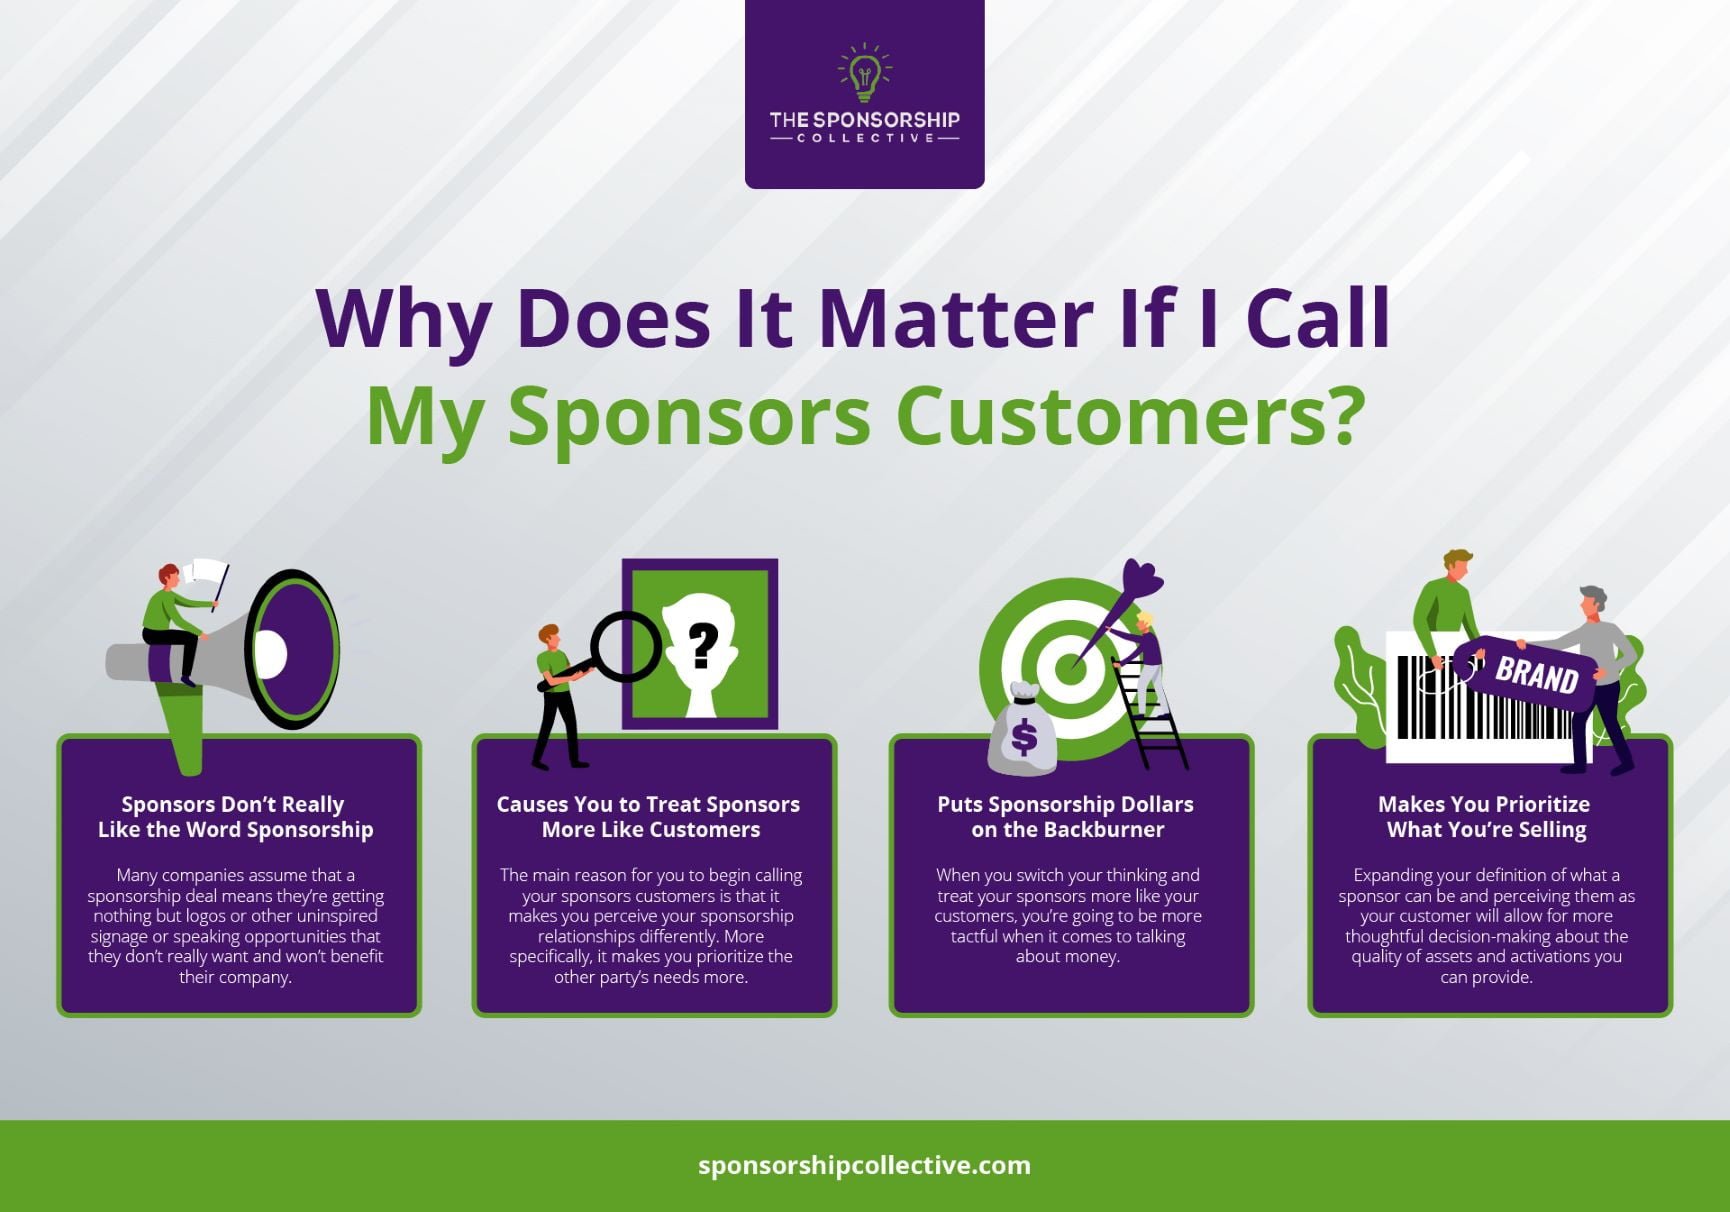 Why Does It Matter If I Call My Sponsors Customers